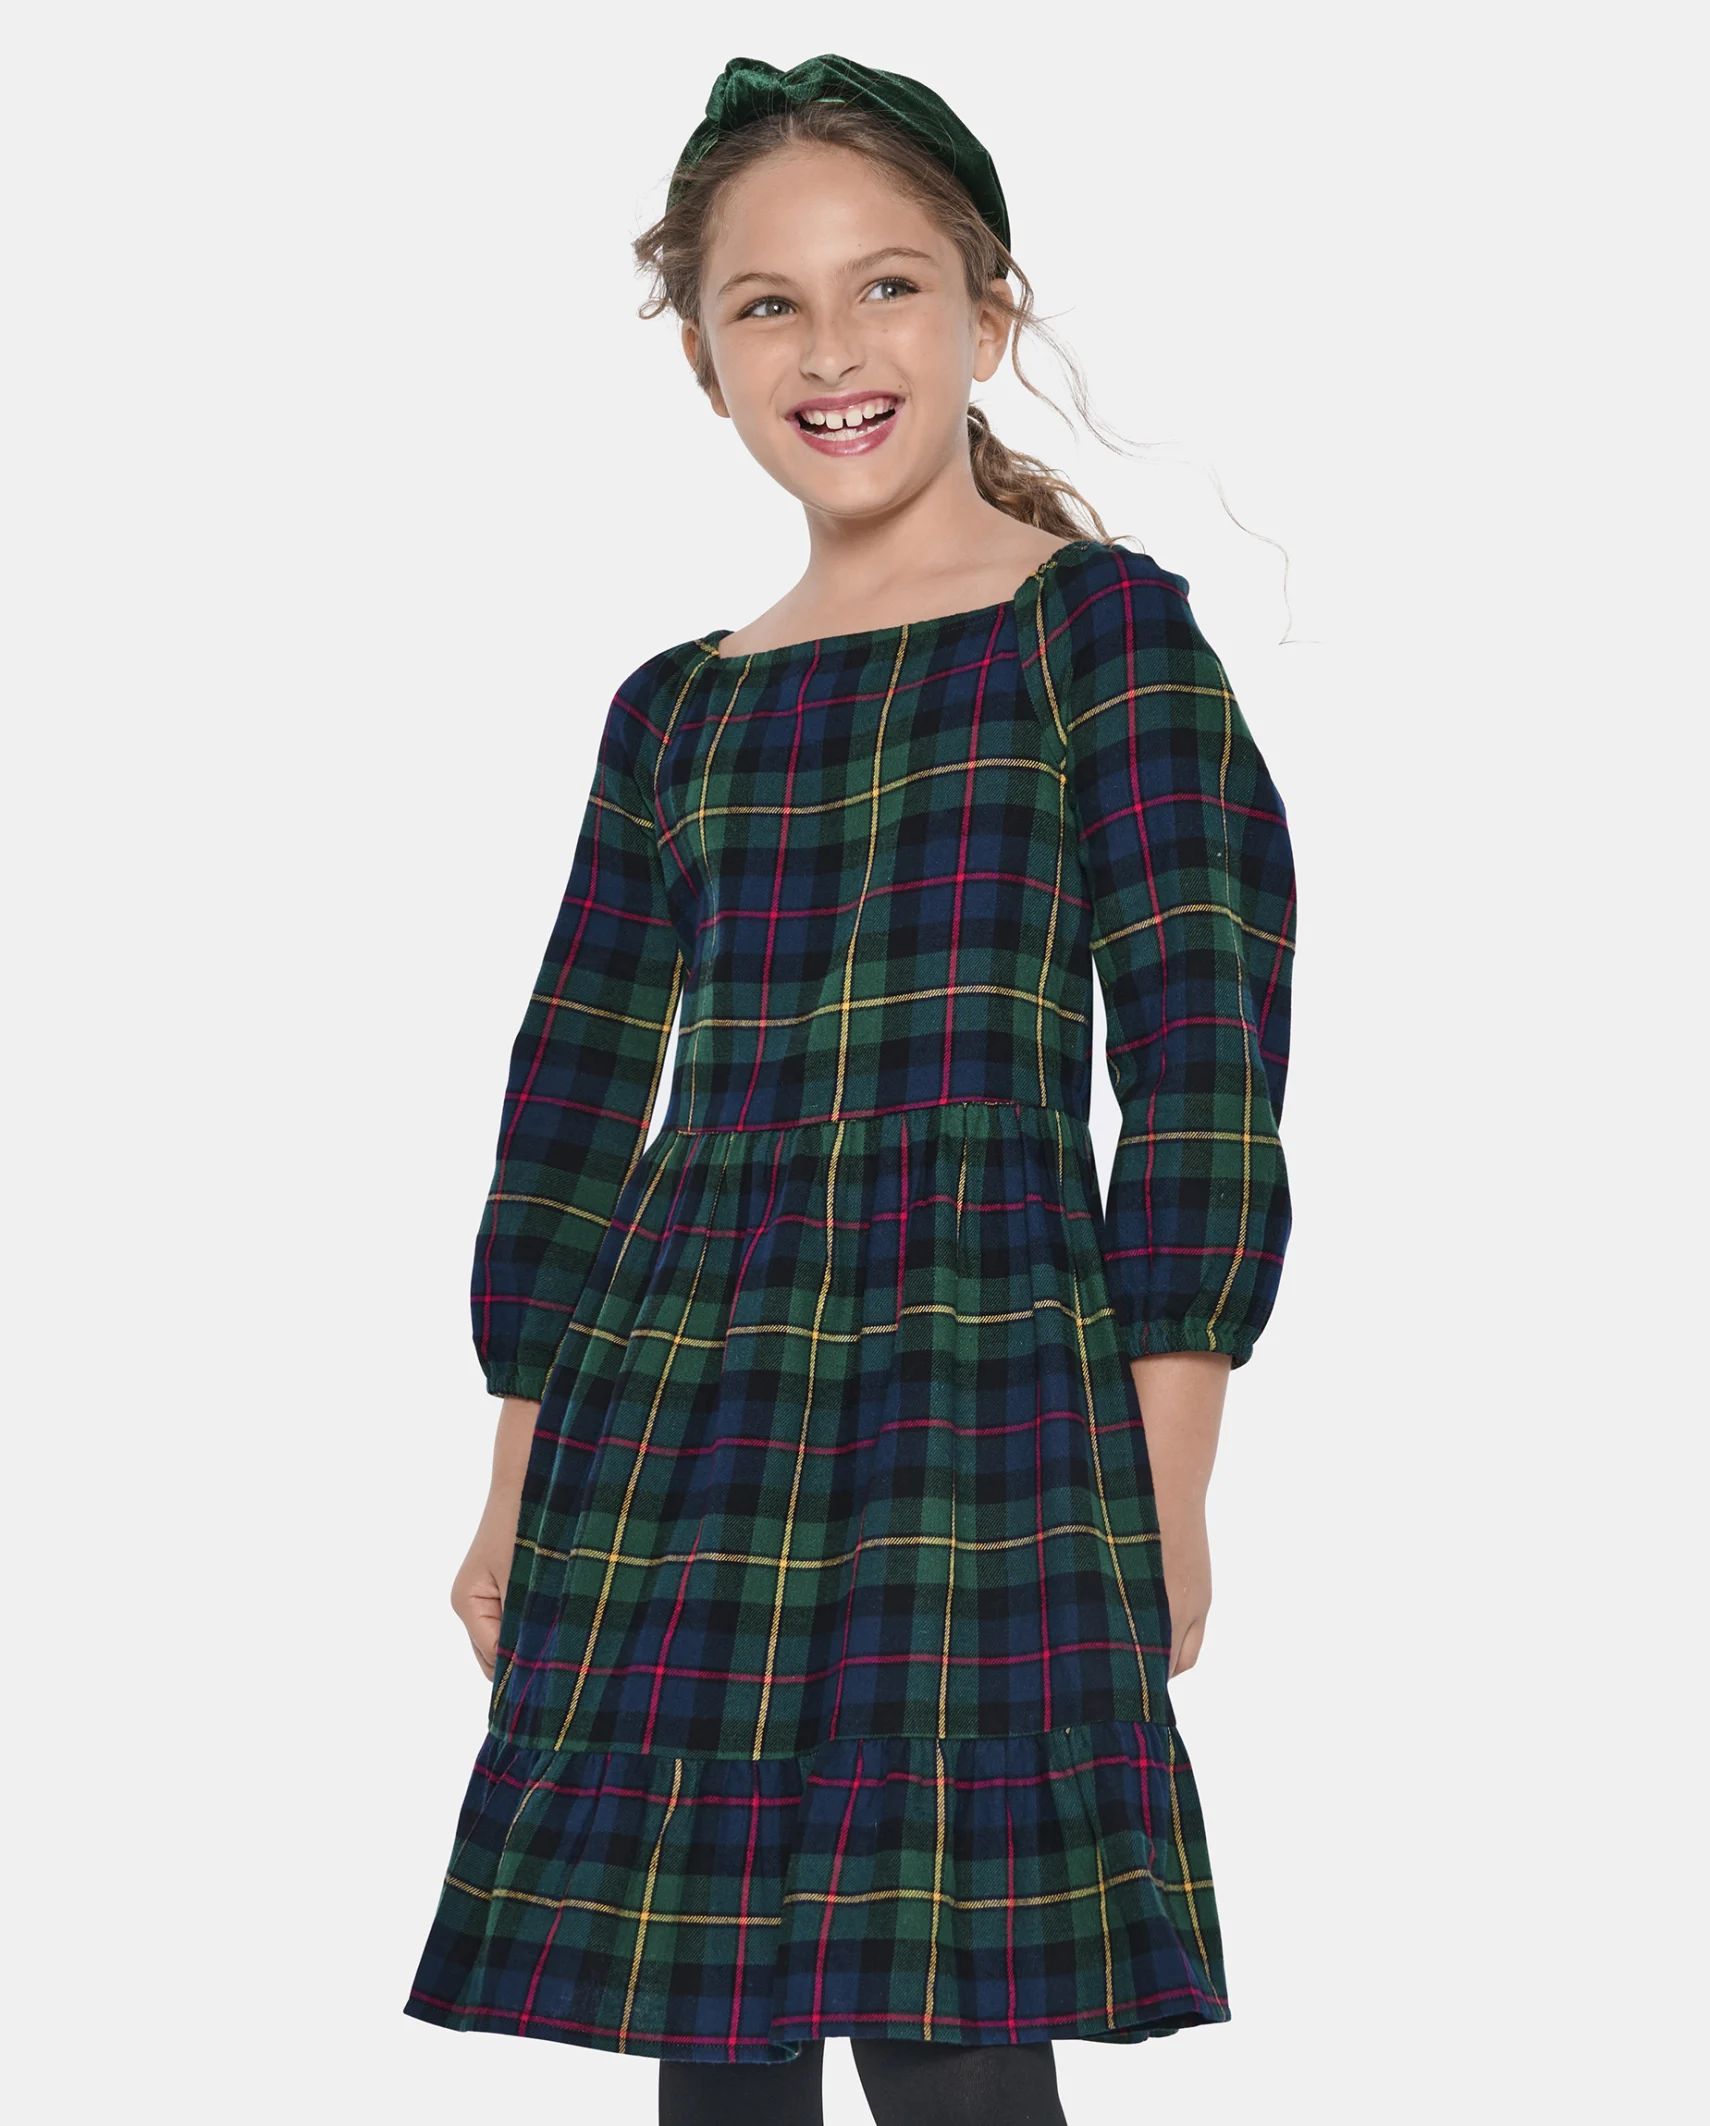 Girls Matching Family Plaid Flannel Tiered Dress - spruceshad | The Children's Place